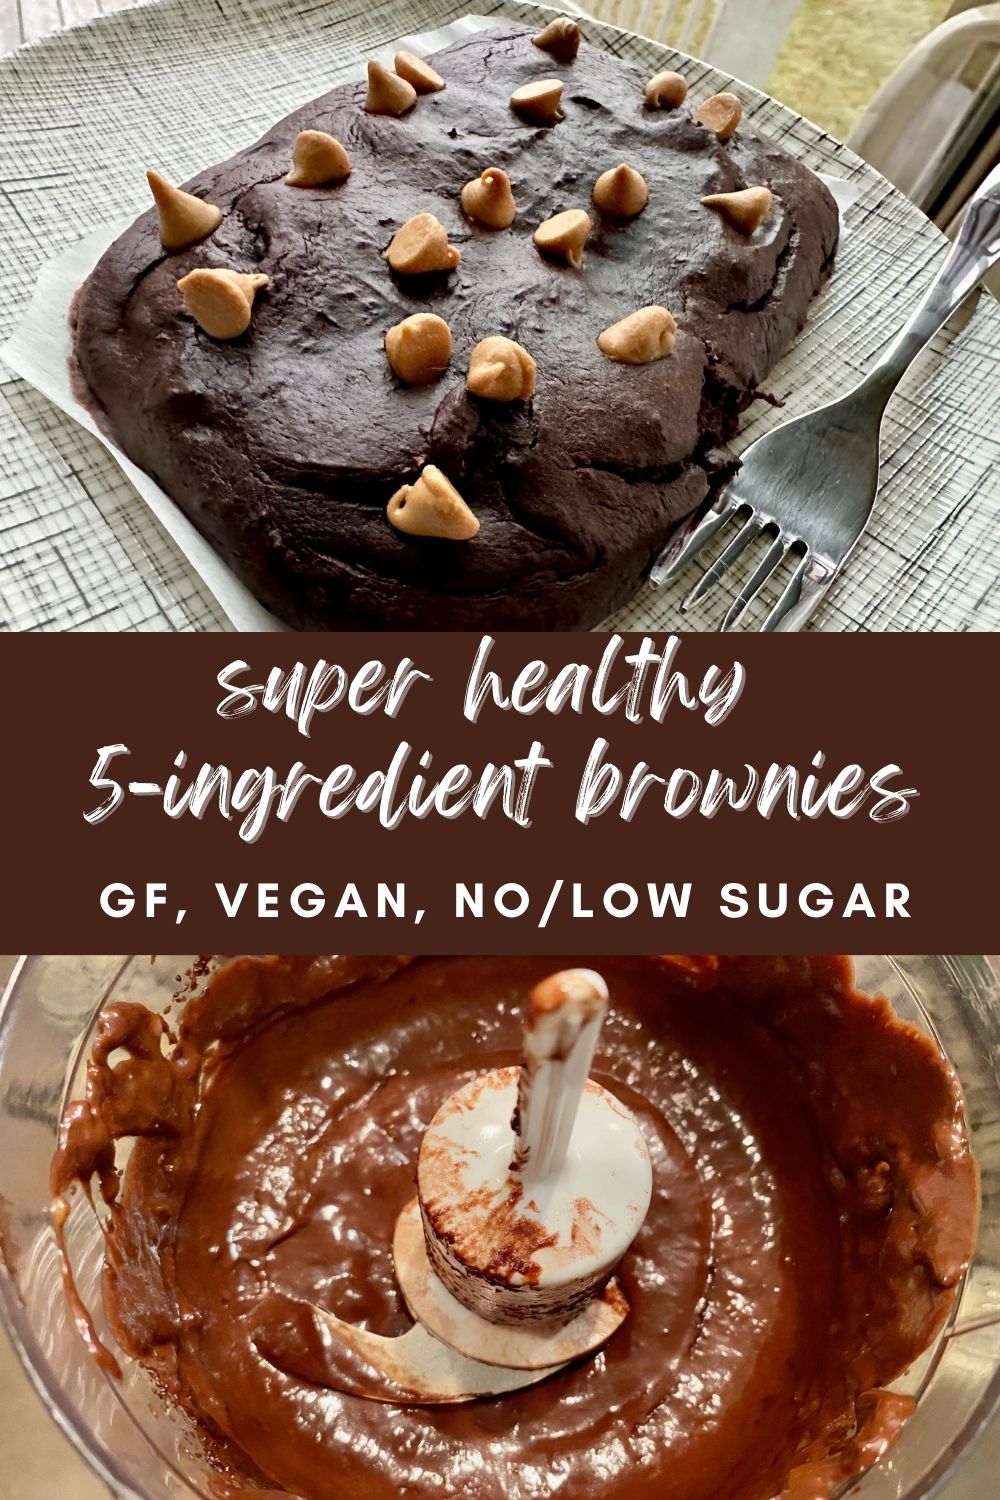 5-Ingredient Healthy Brownies | These delicious healthy banana brownies are made in the blender with only 5 ingredients & about 15 minutes, with no sugar, vegan, gluten-free, grain-free, dairy-free, and egg-free...and yet still delicious! A great healthy dessert recipe that's fast and easy. #healthydessert #gf #grainfree #dessertrecipe #blenderdessert